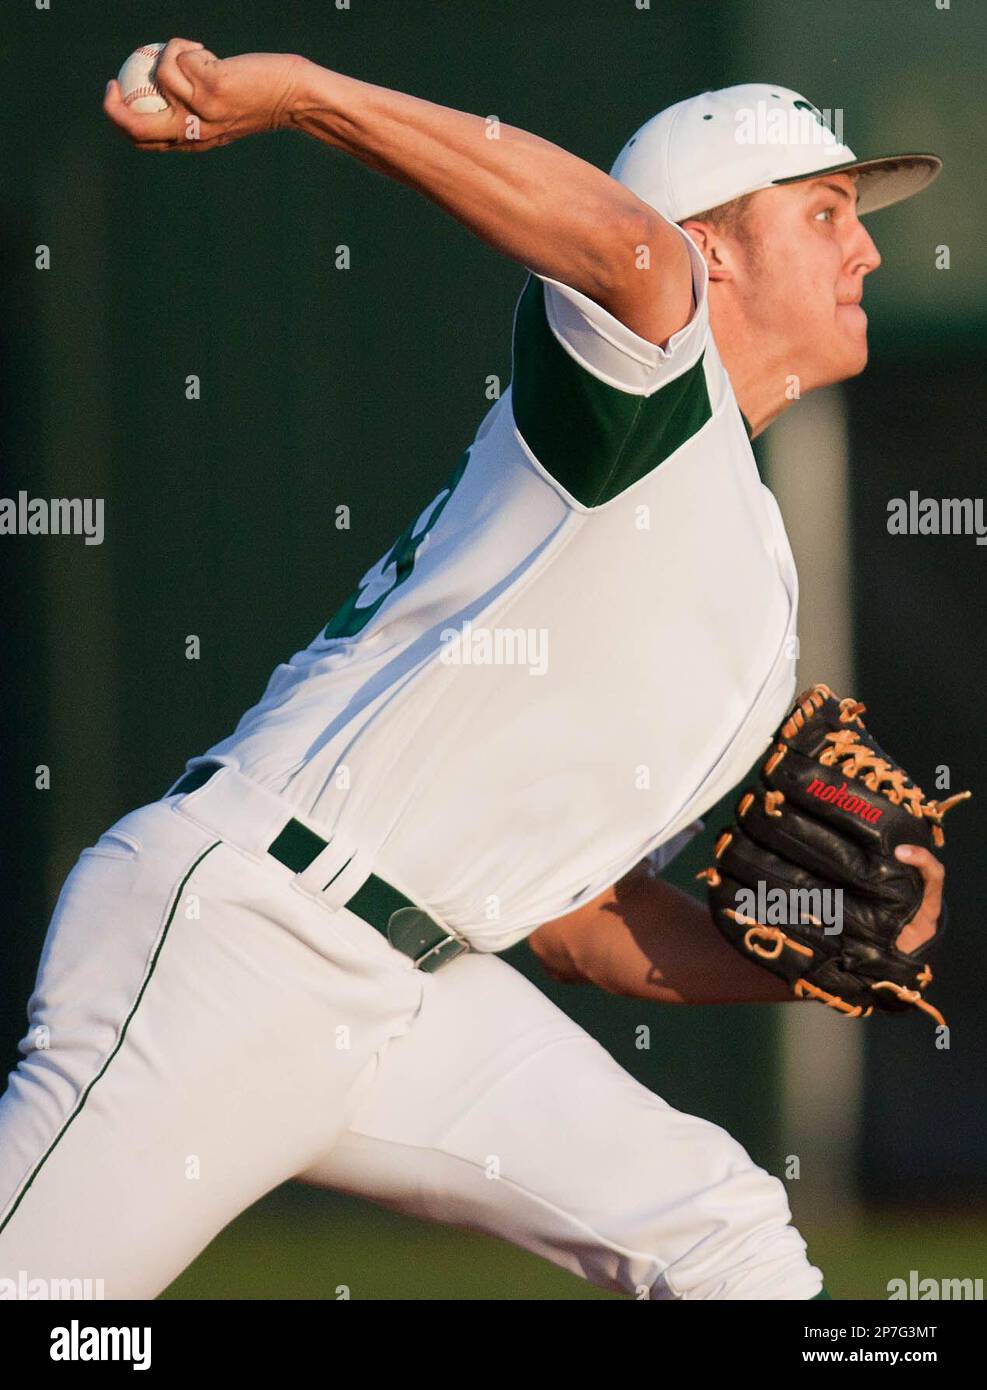 The Woodlands' Jameson Taillon pitches during a night game April